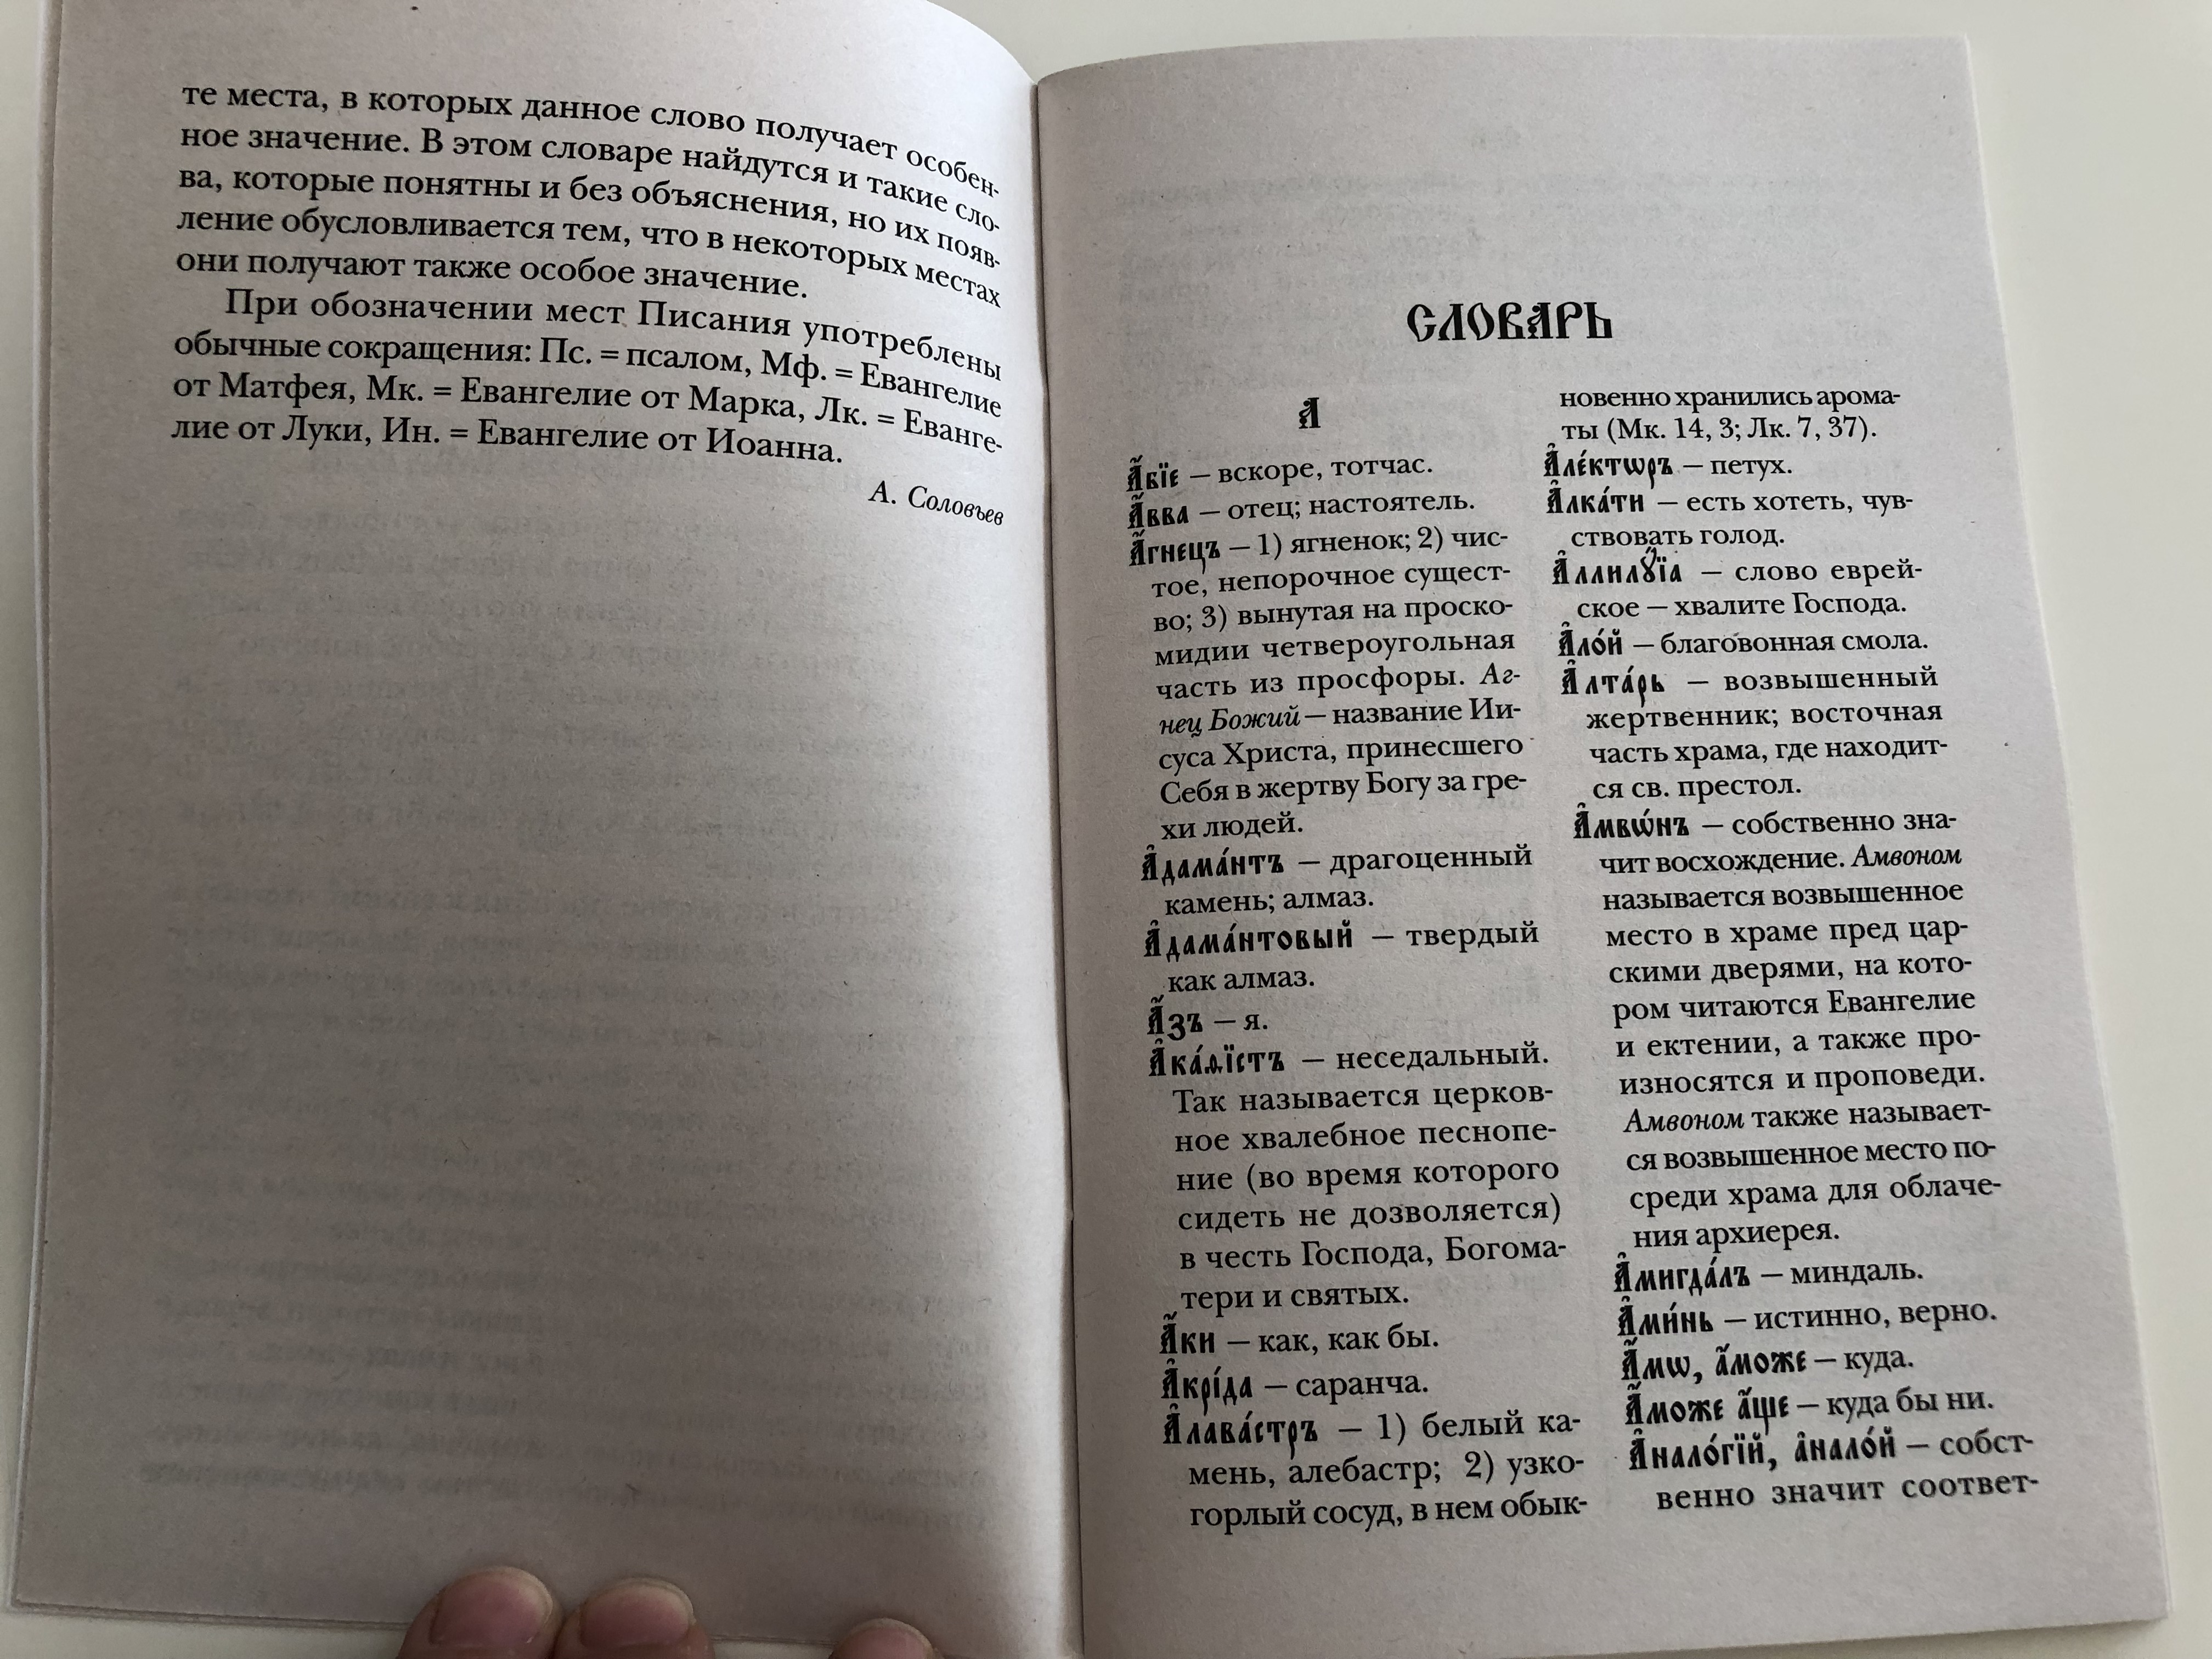 -orthodox-russian-dictionary-of-church-slavonic-liturgical-words-2018-5-.jpg